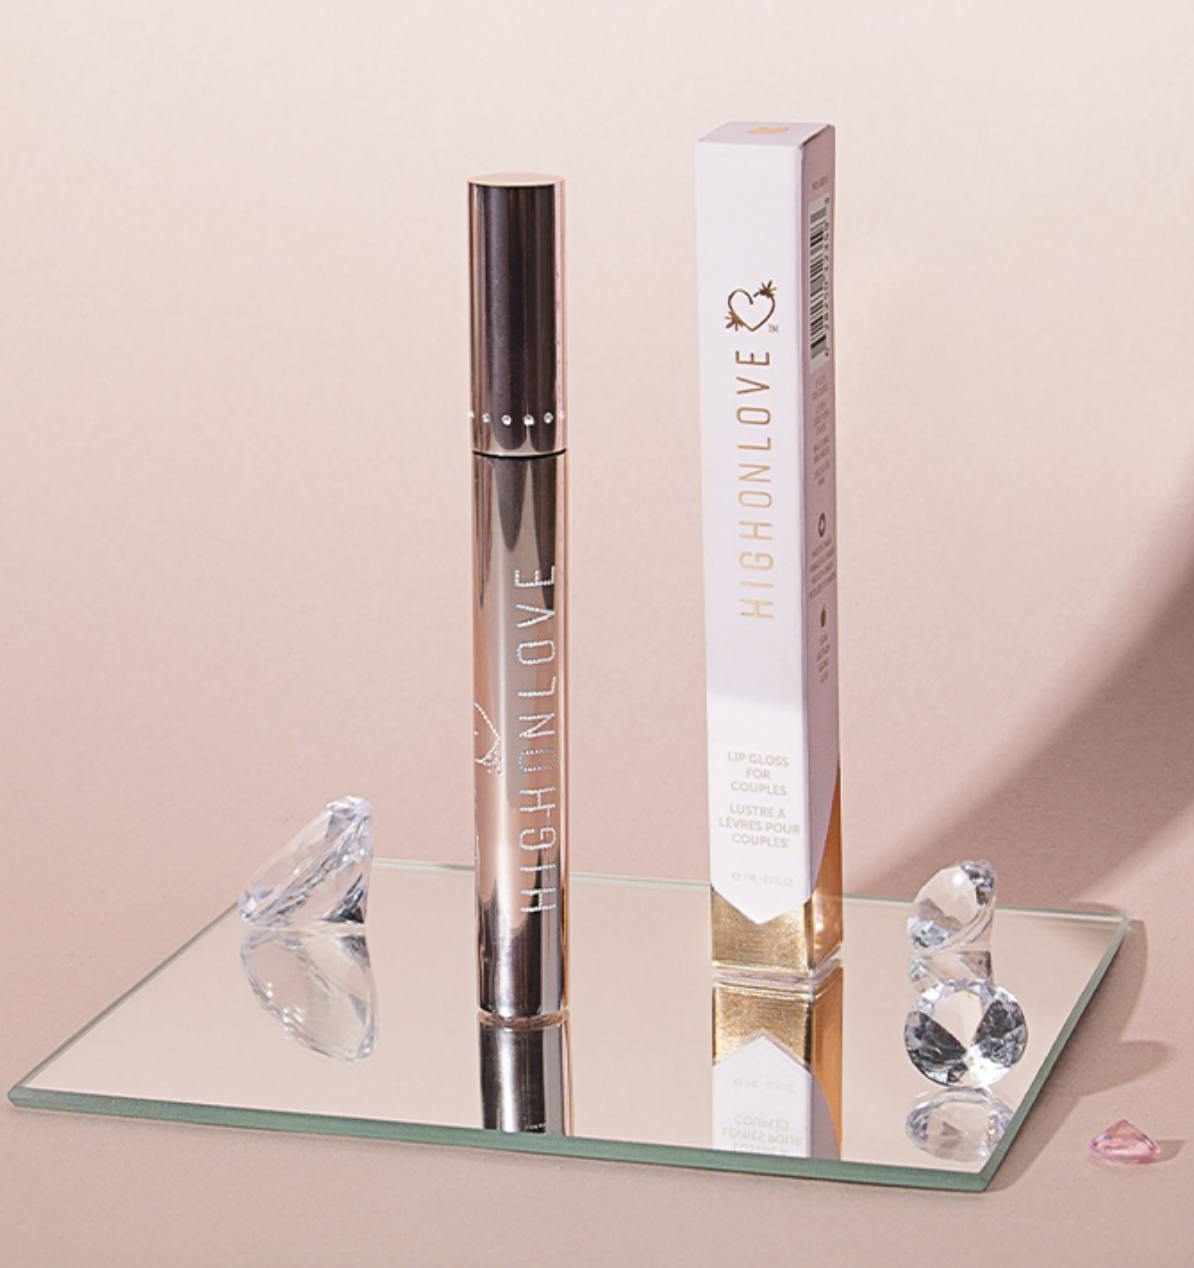 HighOnLove's CBD lip plumping gloss container and packing propped on a mirror next to diamonds.